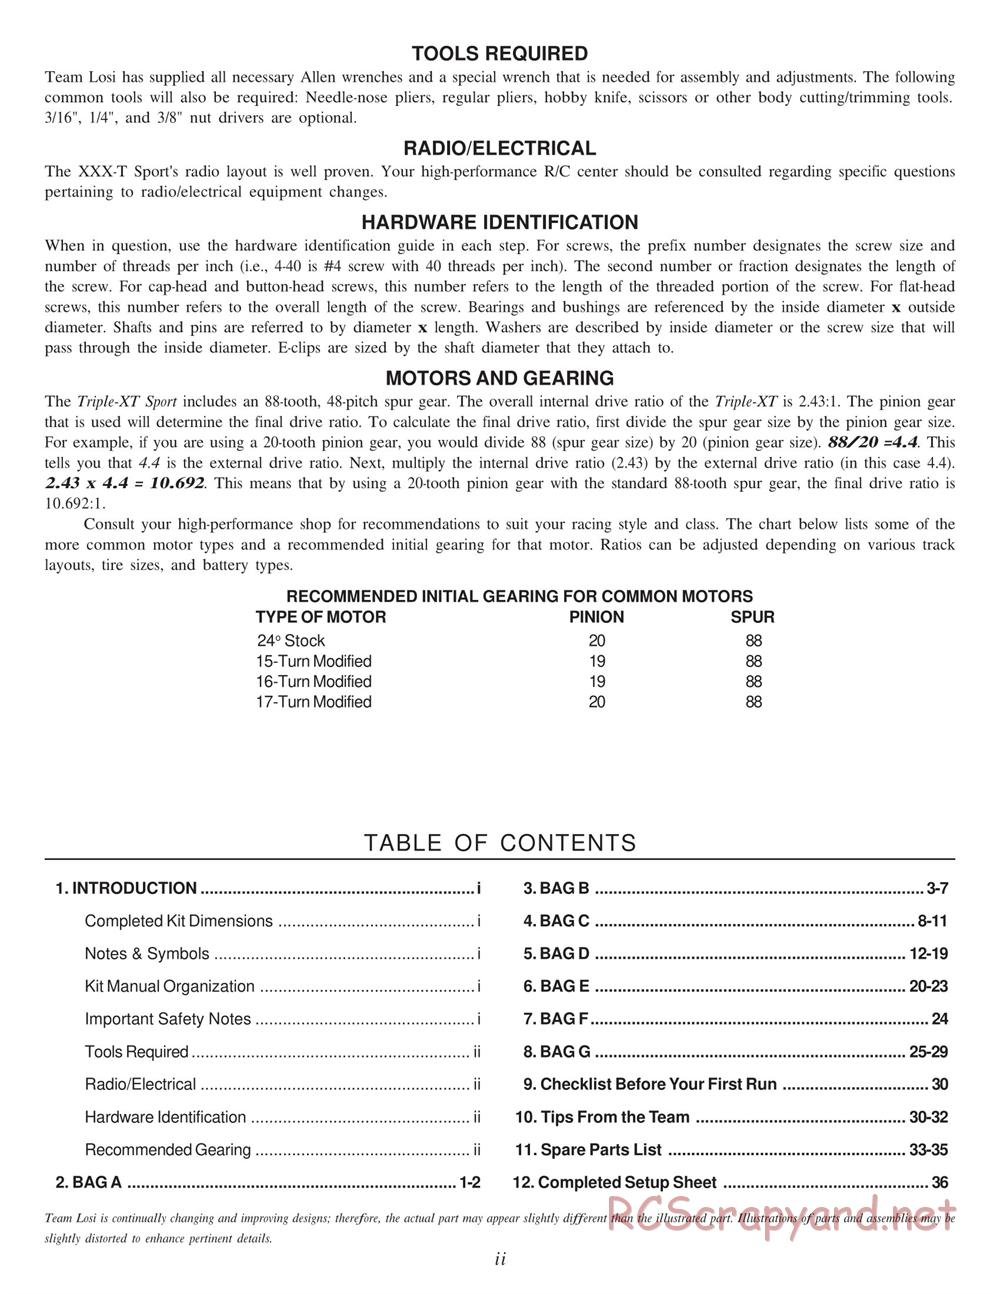 Team Losi - XXXT Sport RTRII - Manual - Page 4